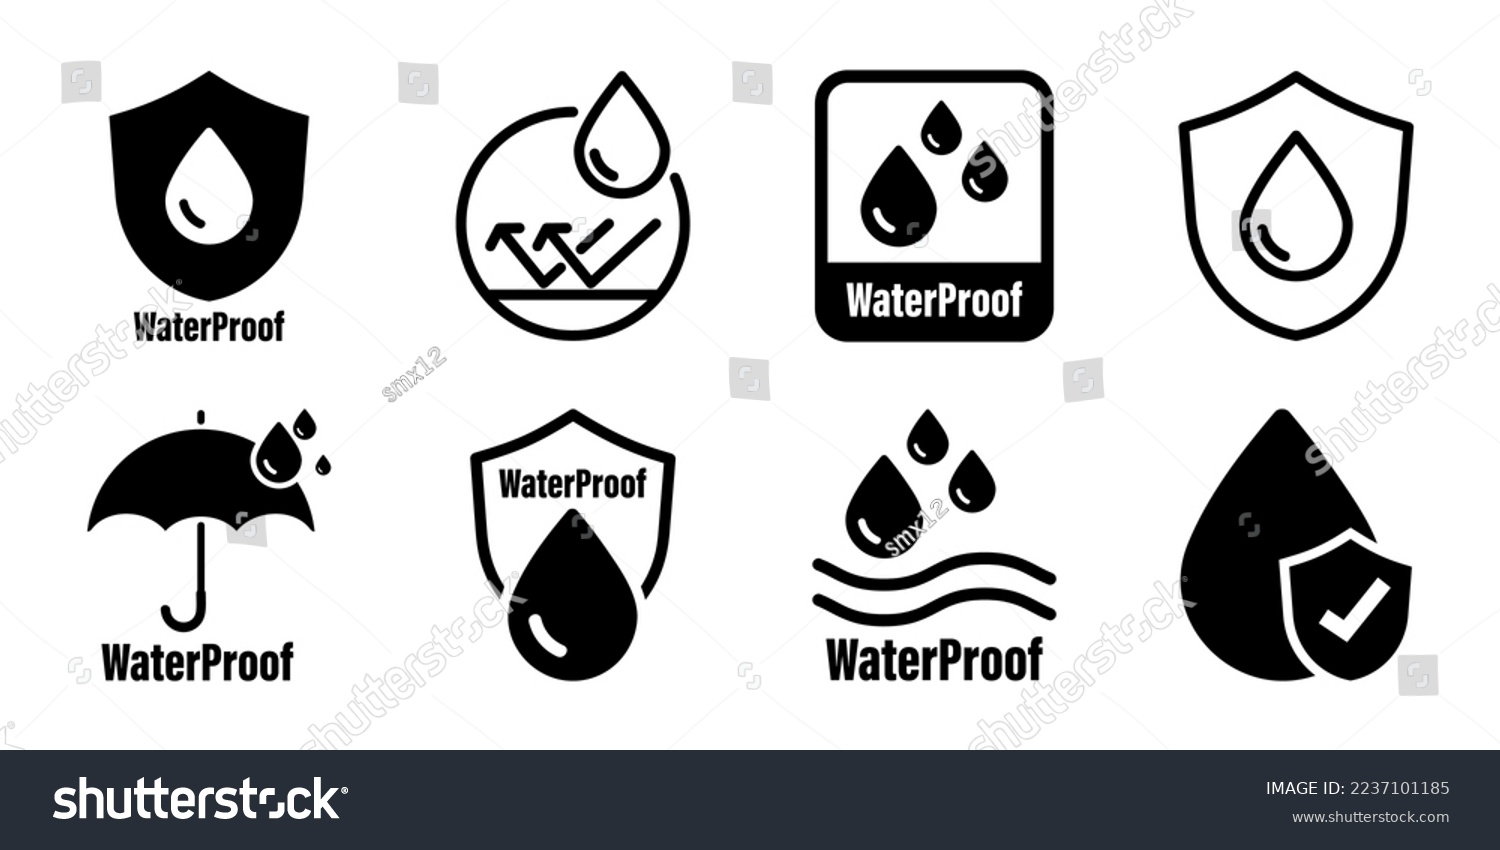 Waterproof icons. Water Proof. Collection of water resistant signs. Water protection, liquid proof protection. Shield with water drop. Anti wetting material, hydrophobic fabric, surface protection #2237101185